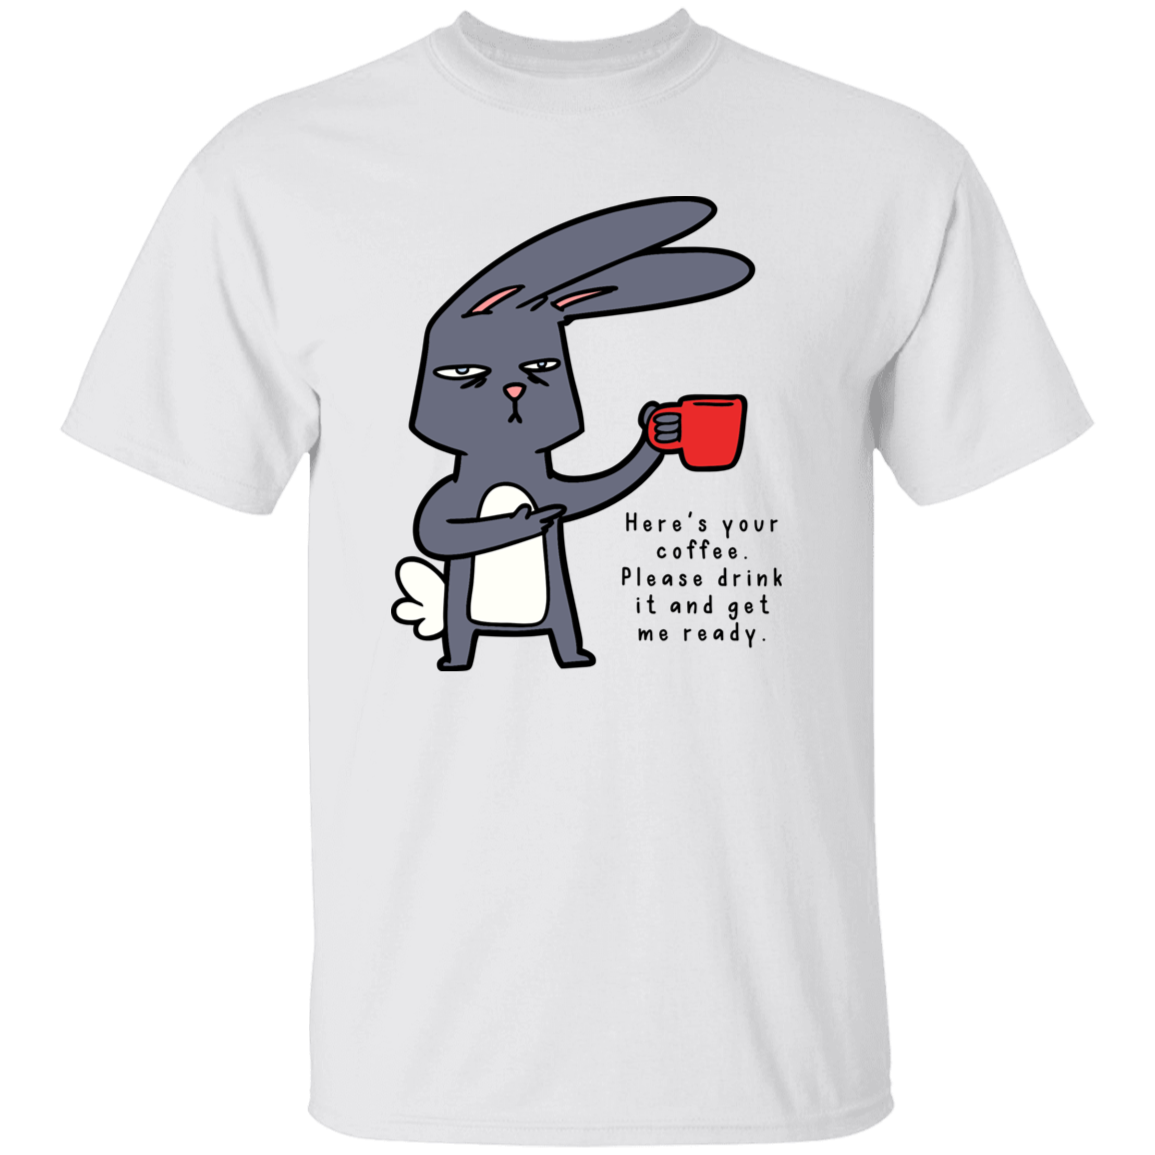 HERE'S YOUR COFFEE T-SHIRT